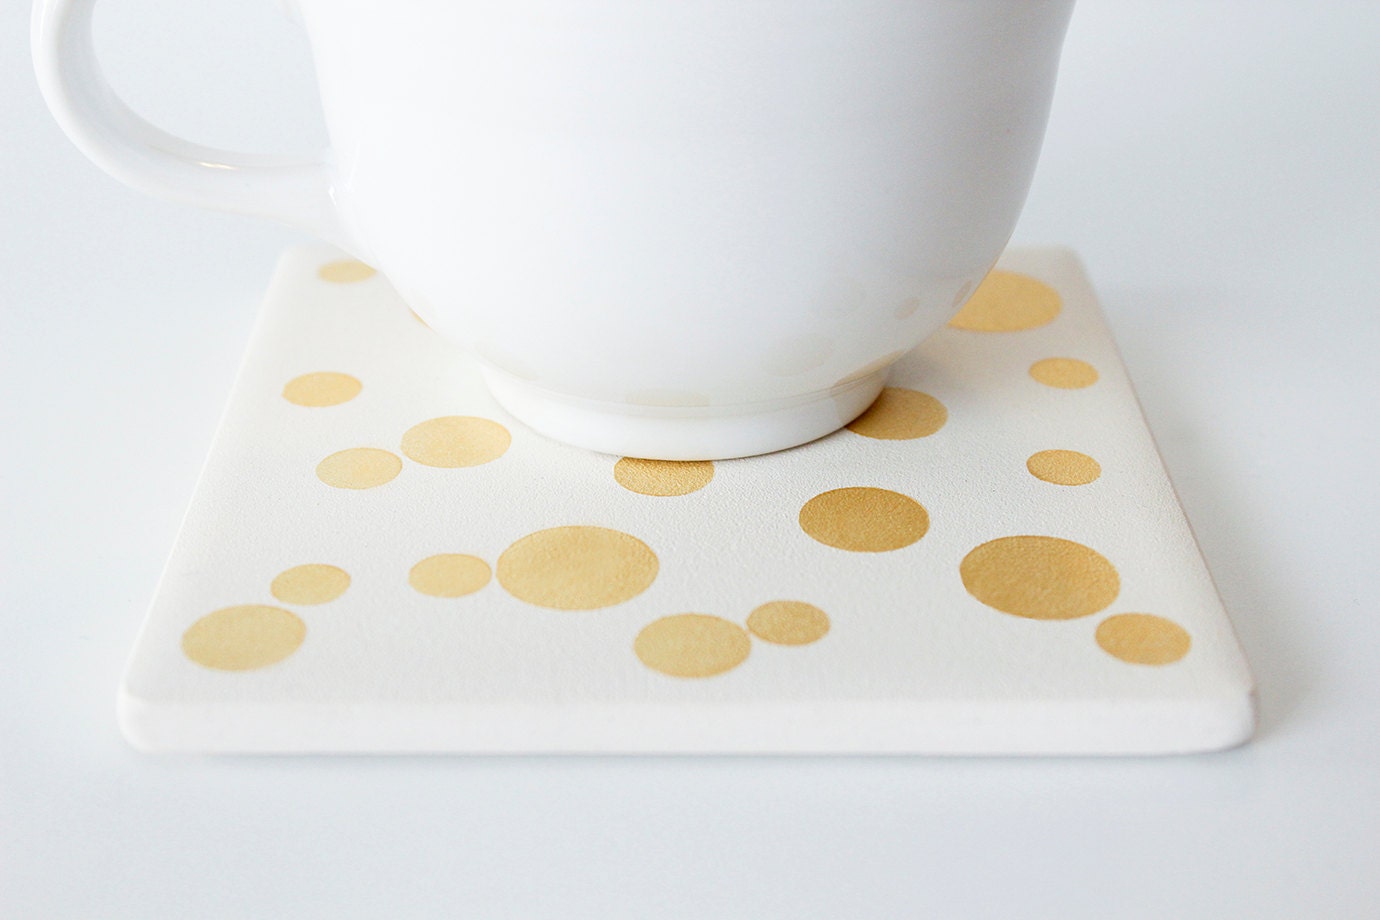 Gold Dotted Coasters Hand Painted White and Gold Ceramic Tile Coasters - Set of 4 Coasters - theCoastal